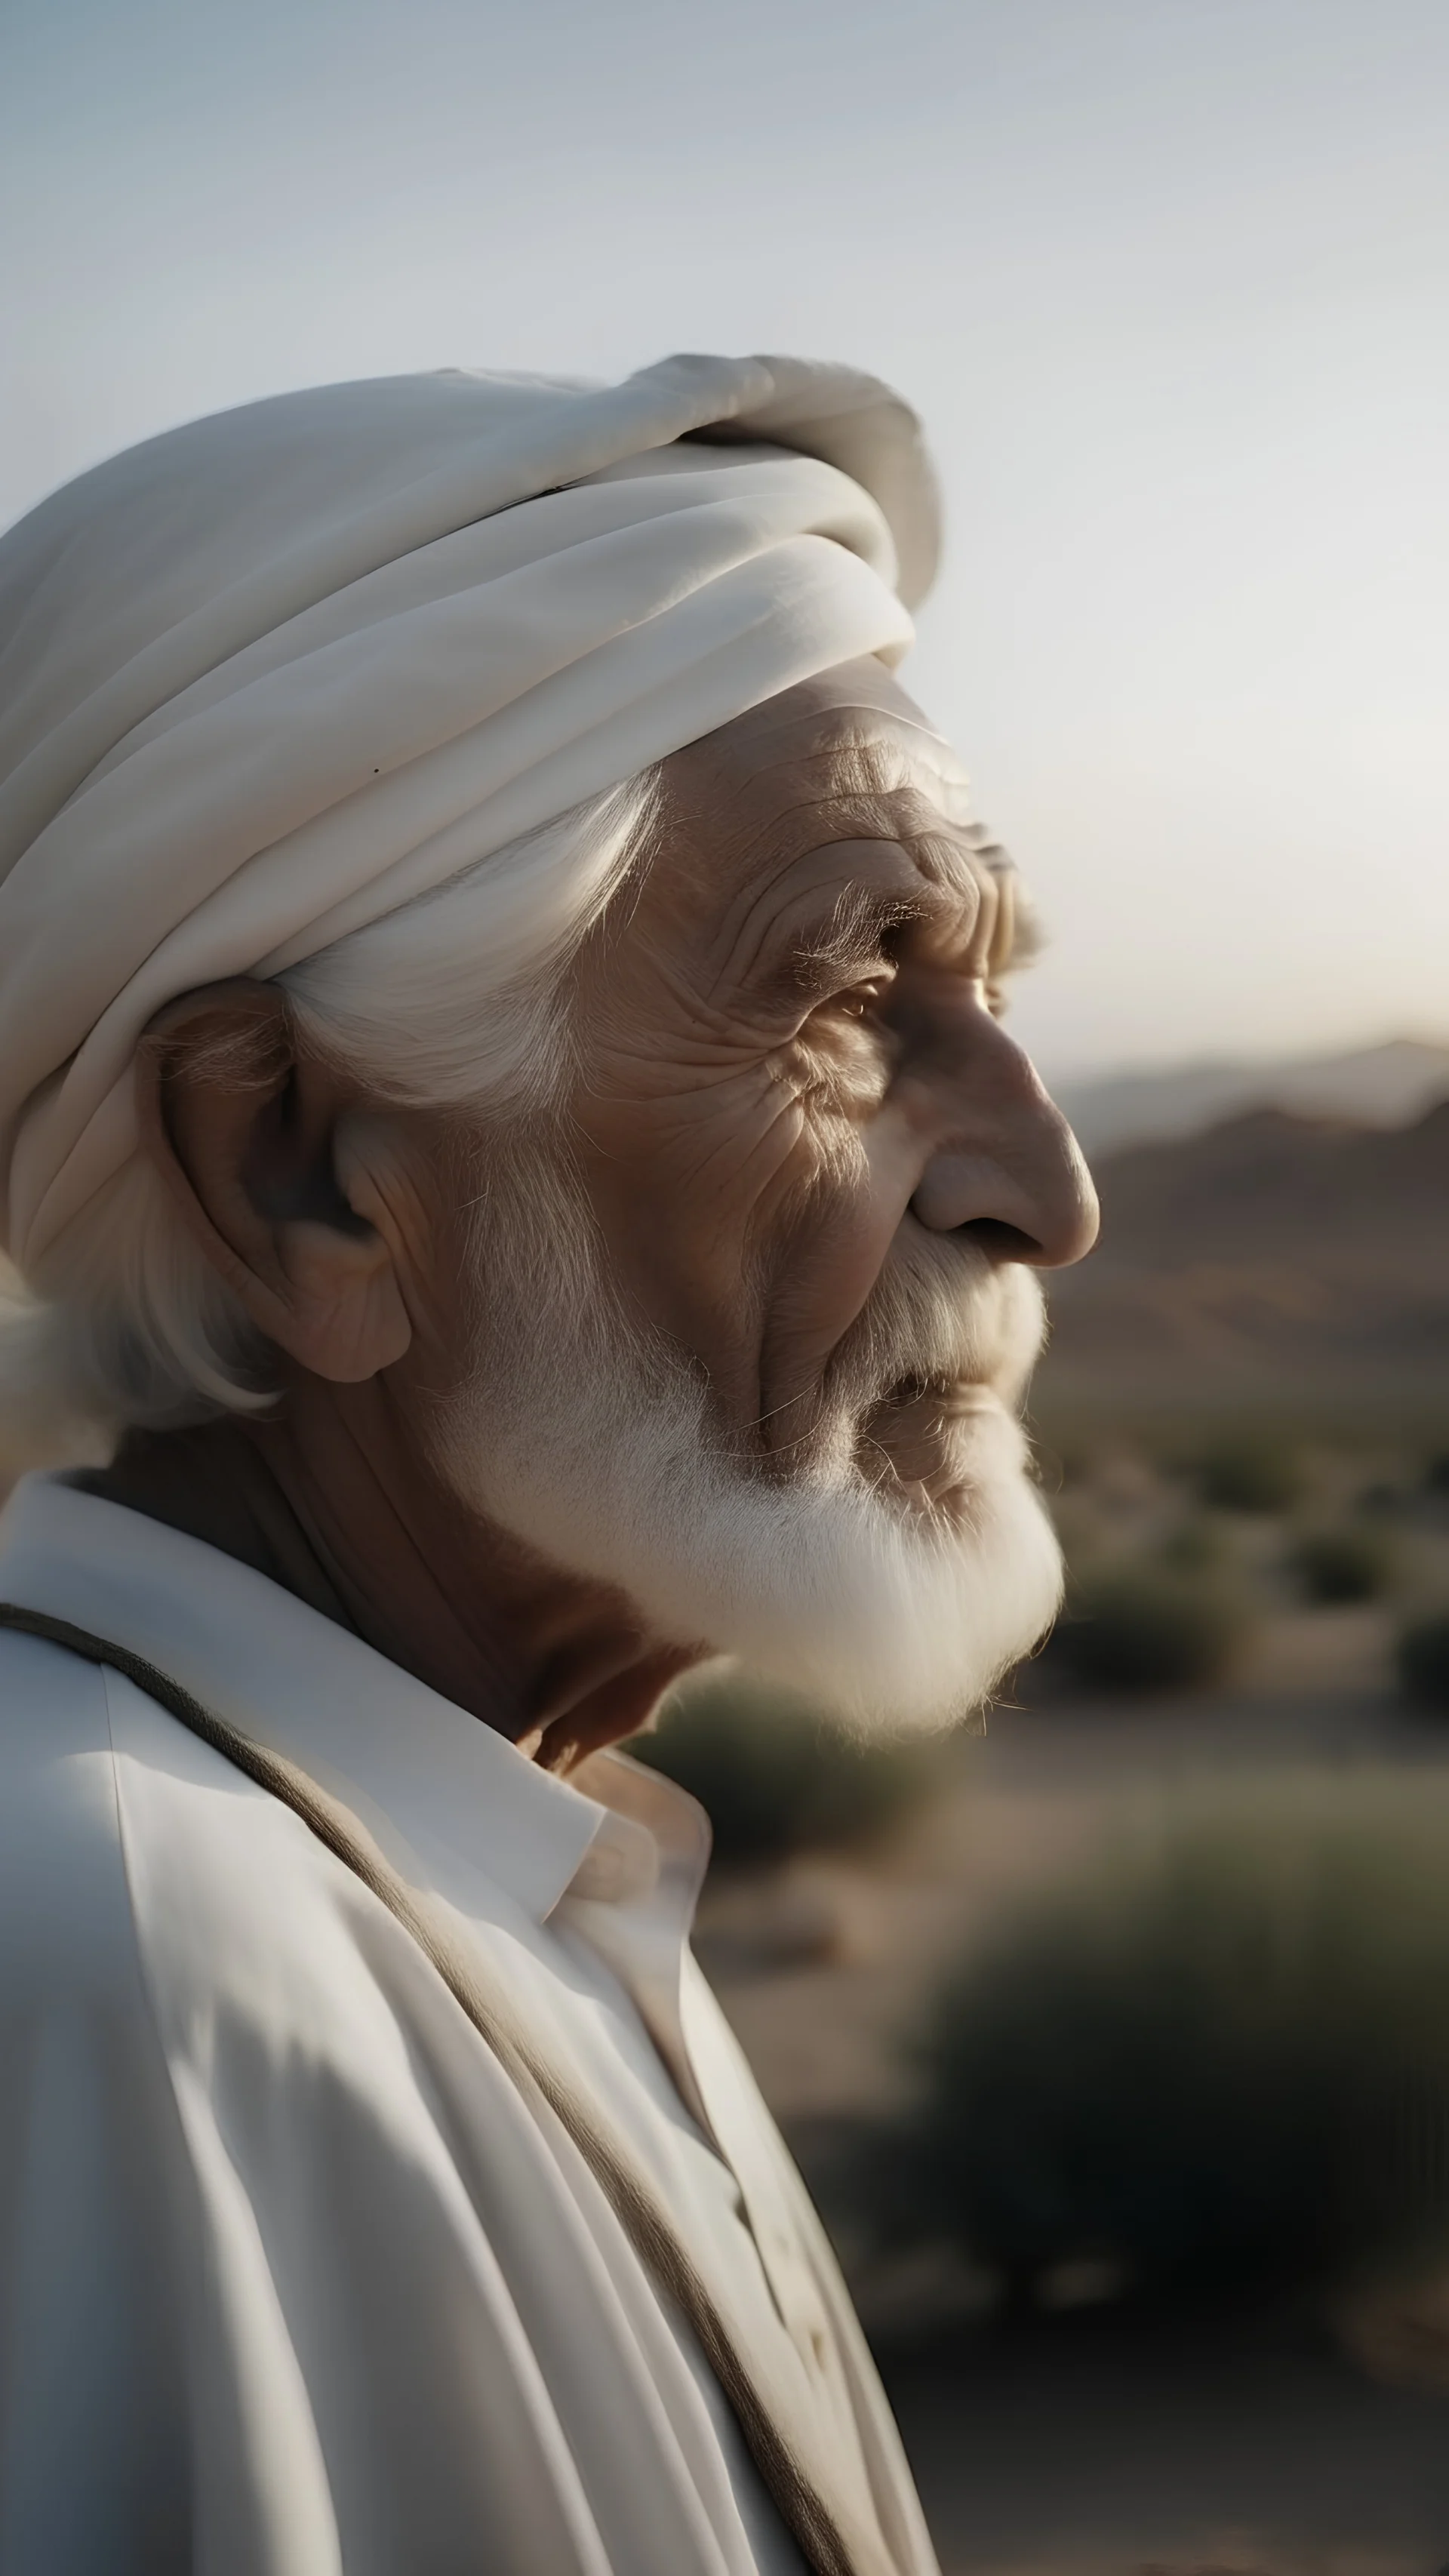 An elderly, wise Arab man with a dignified and dignified appearance, his face to the screen. He turned to the left towards the screen, and behind him were scenes of nature and the sky, wearing white clothes.